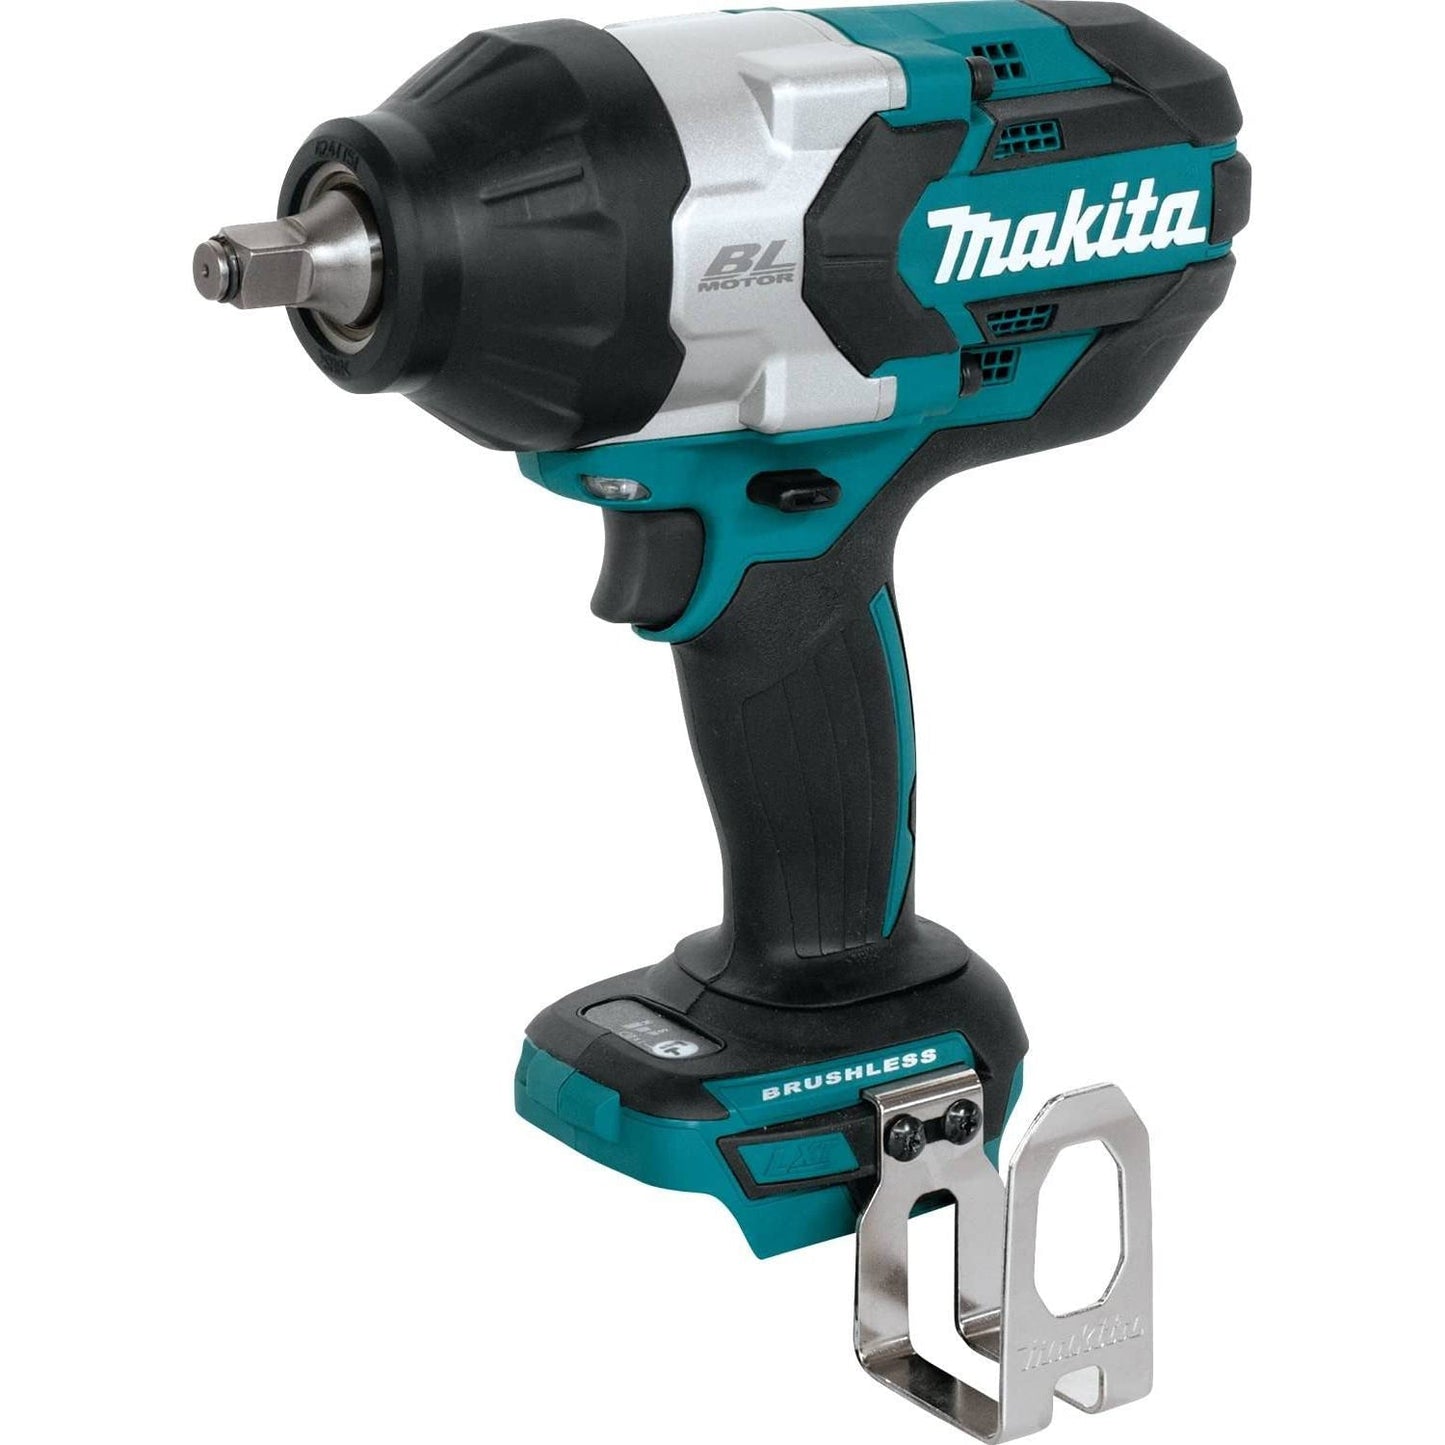 Makita 18V LXT® Lithium-Ion Brushless Cordless High-Torque 1/2" Sq. Drive Impact Wrench, Tool Only (XWT08Z) - Nyson Retail